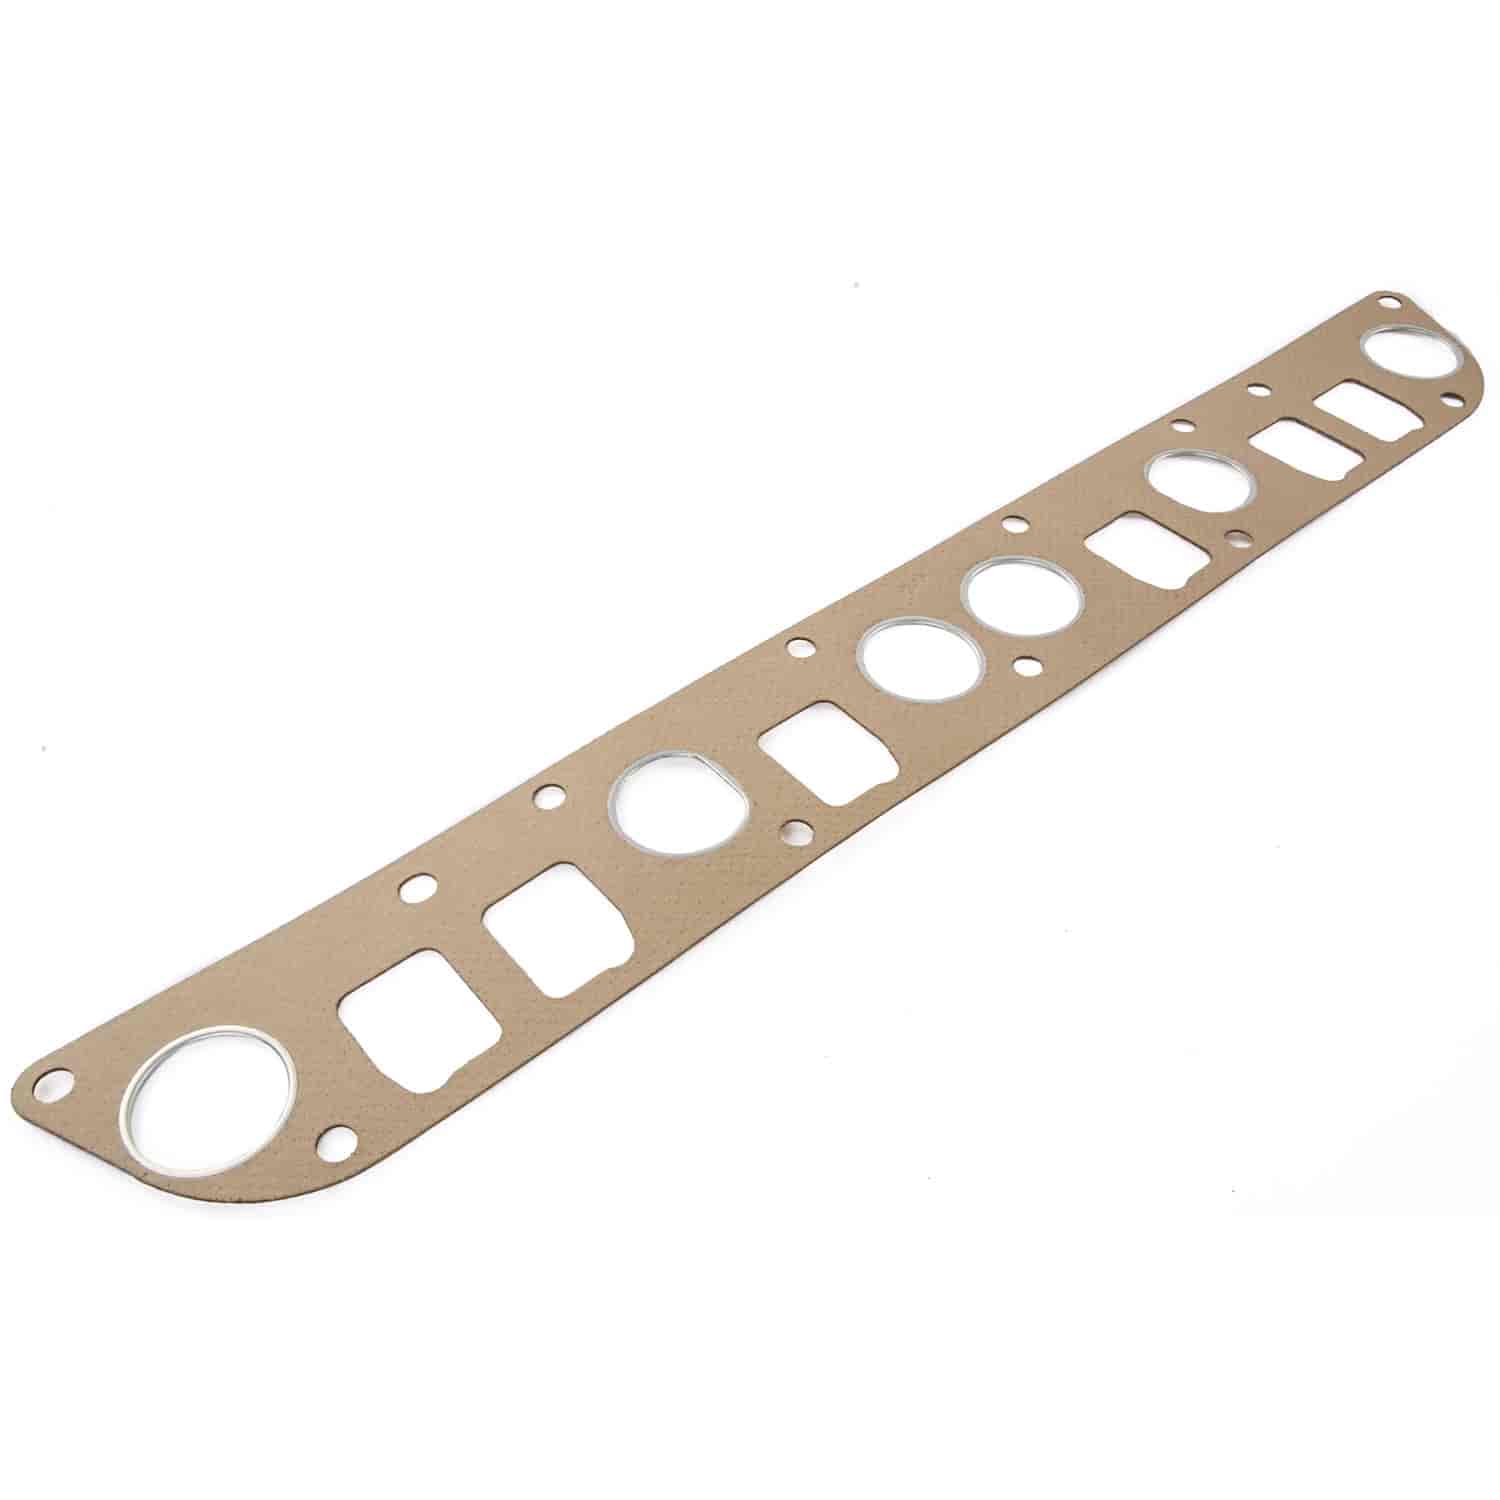 Intake Gaskets for 1987-2006 Jeep 4.0L Inline Six Cylinder